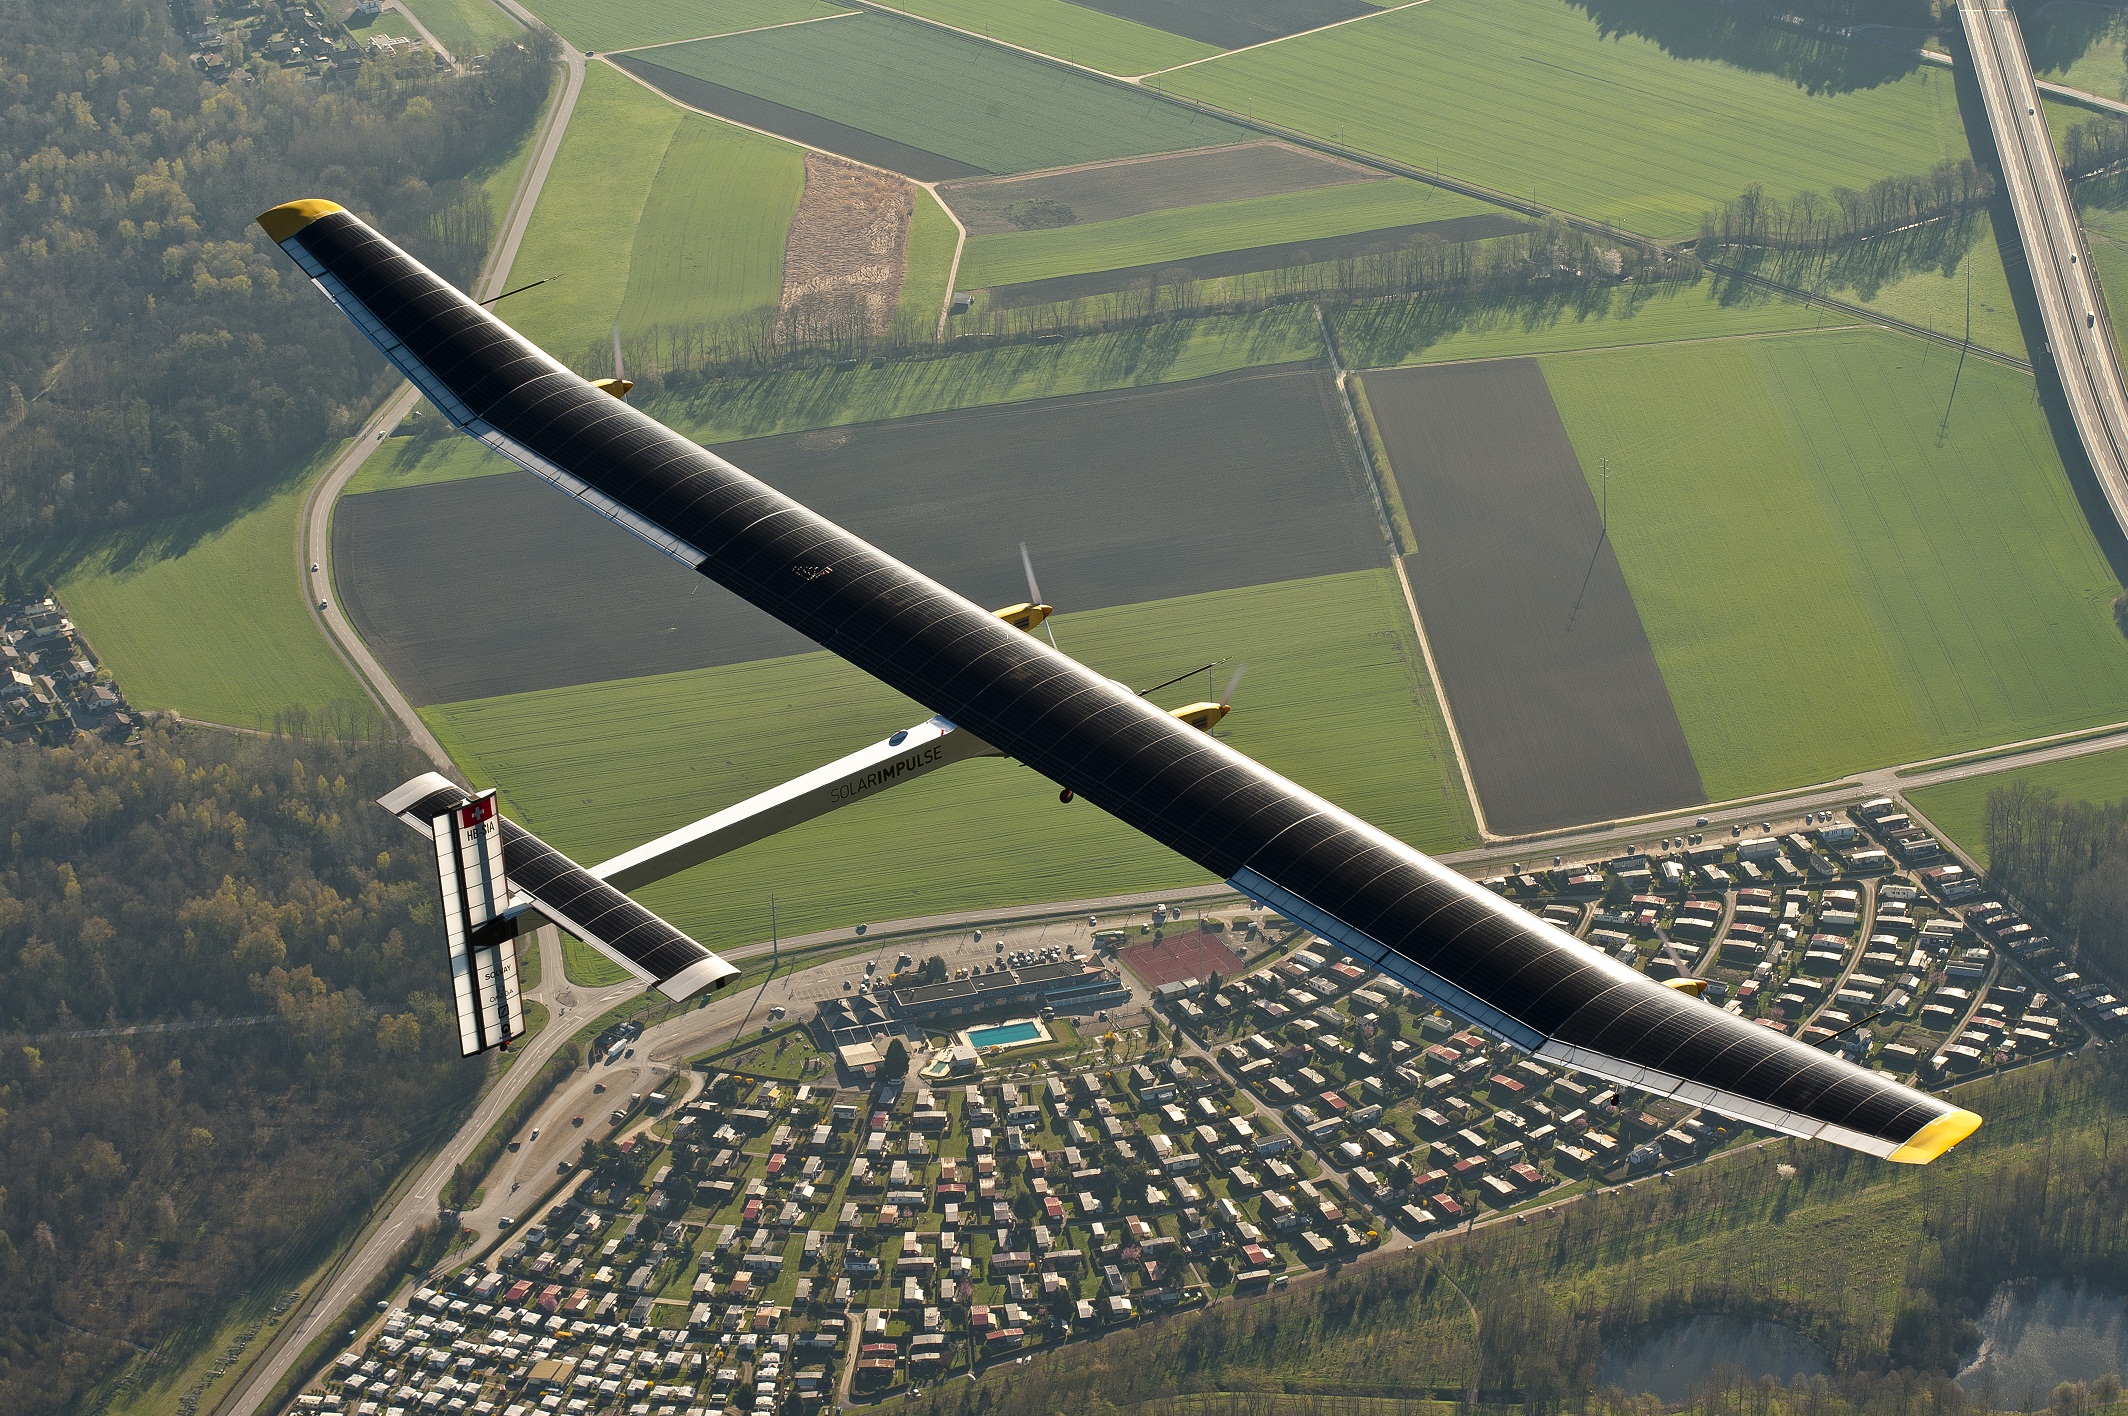 Gliding Through The World With 'NO' Drop Of Fuel, Solar Powered Plane Takes-Off.